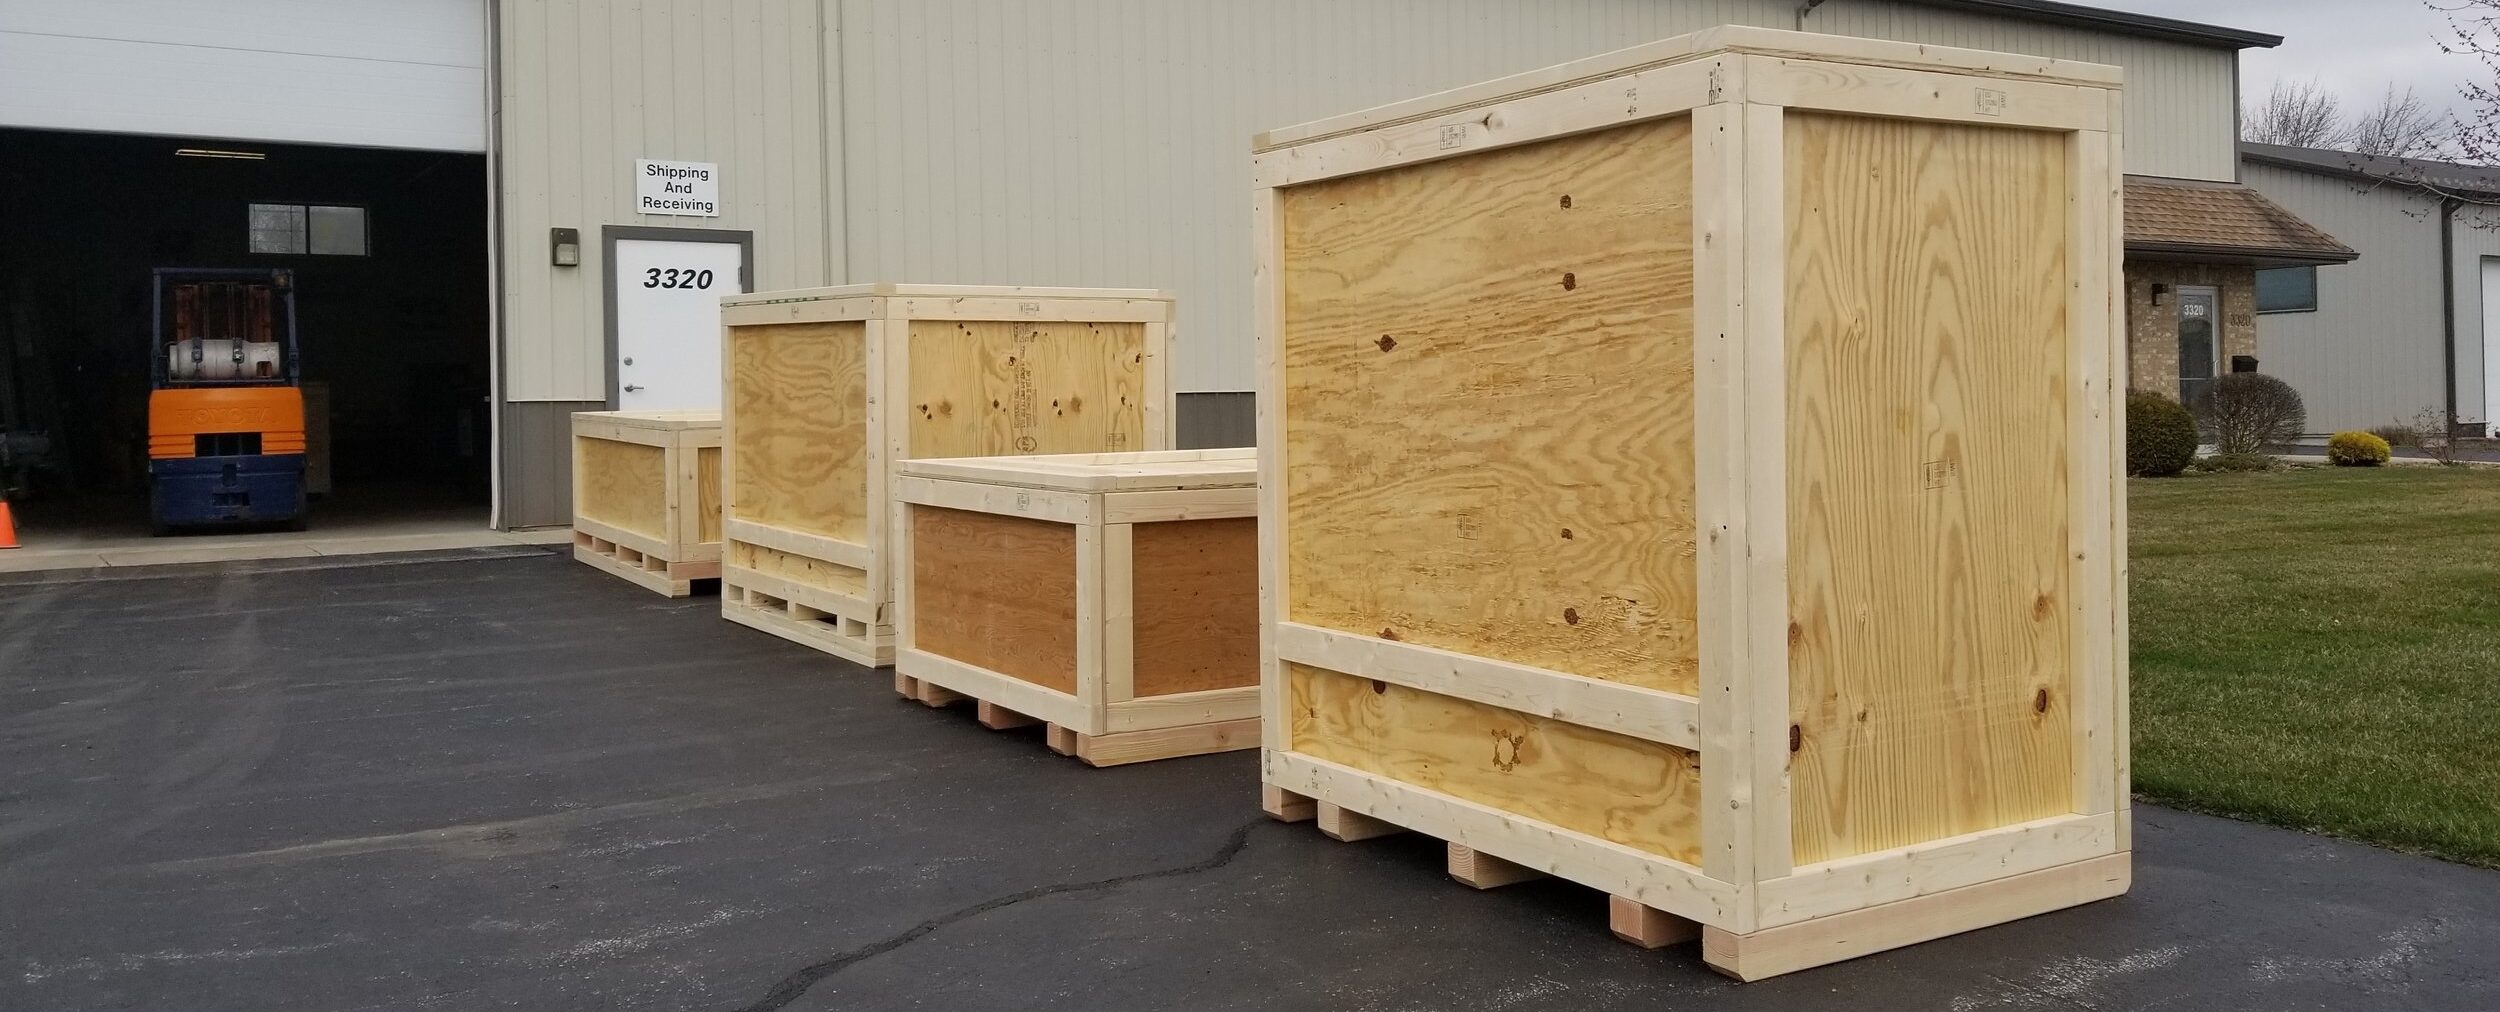 four large crates sitting outside on a businesses driveway